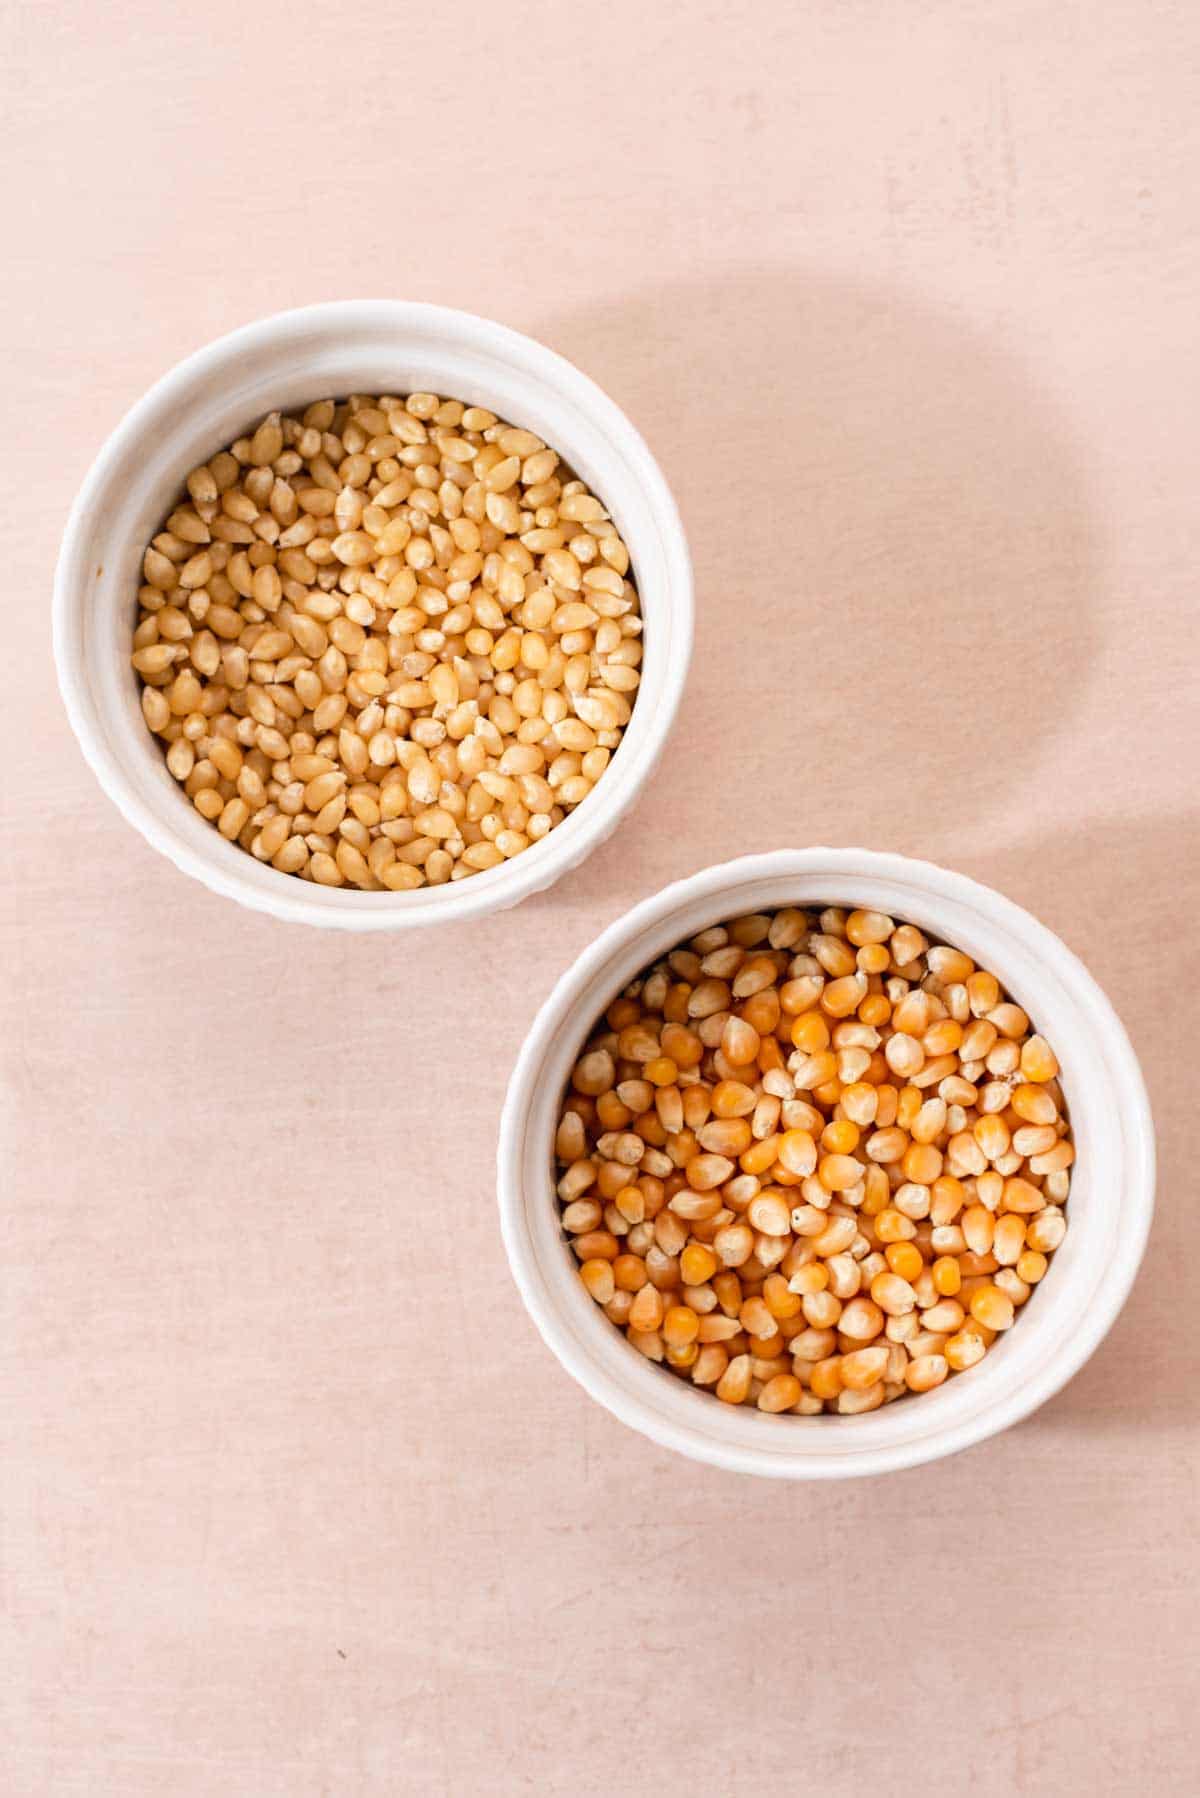 Two white bowls filled with white and yellow popcorn kernels.